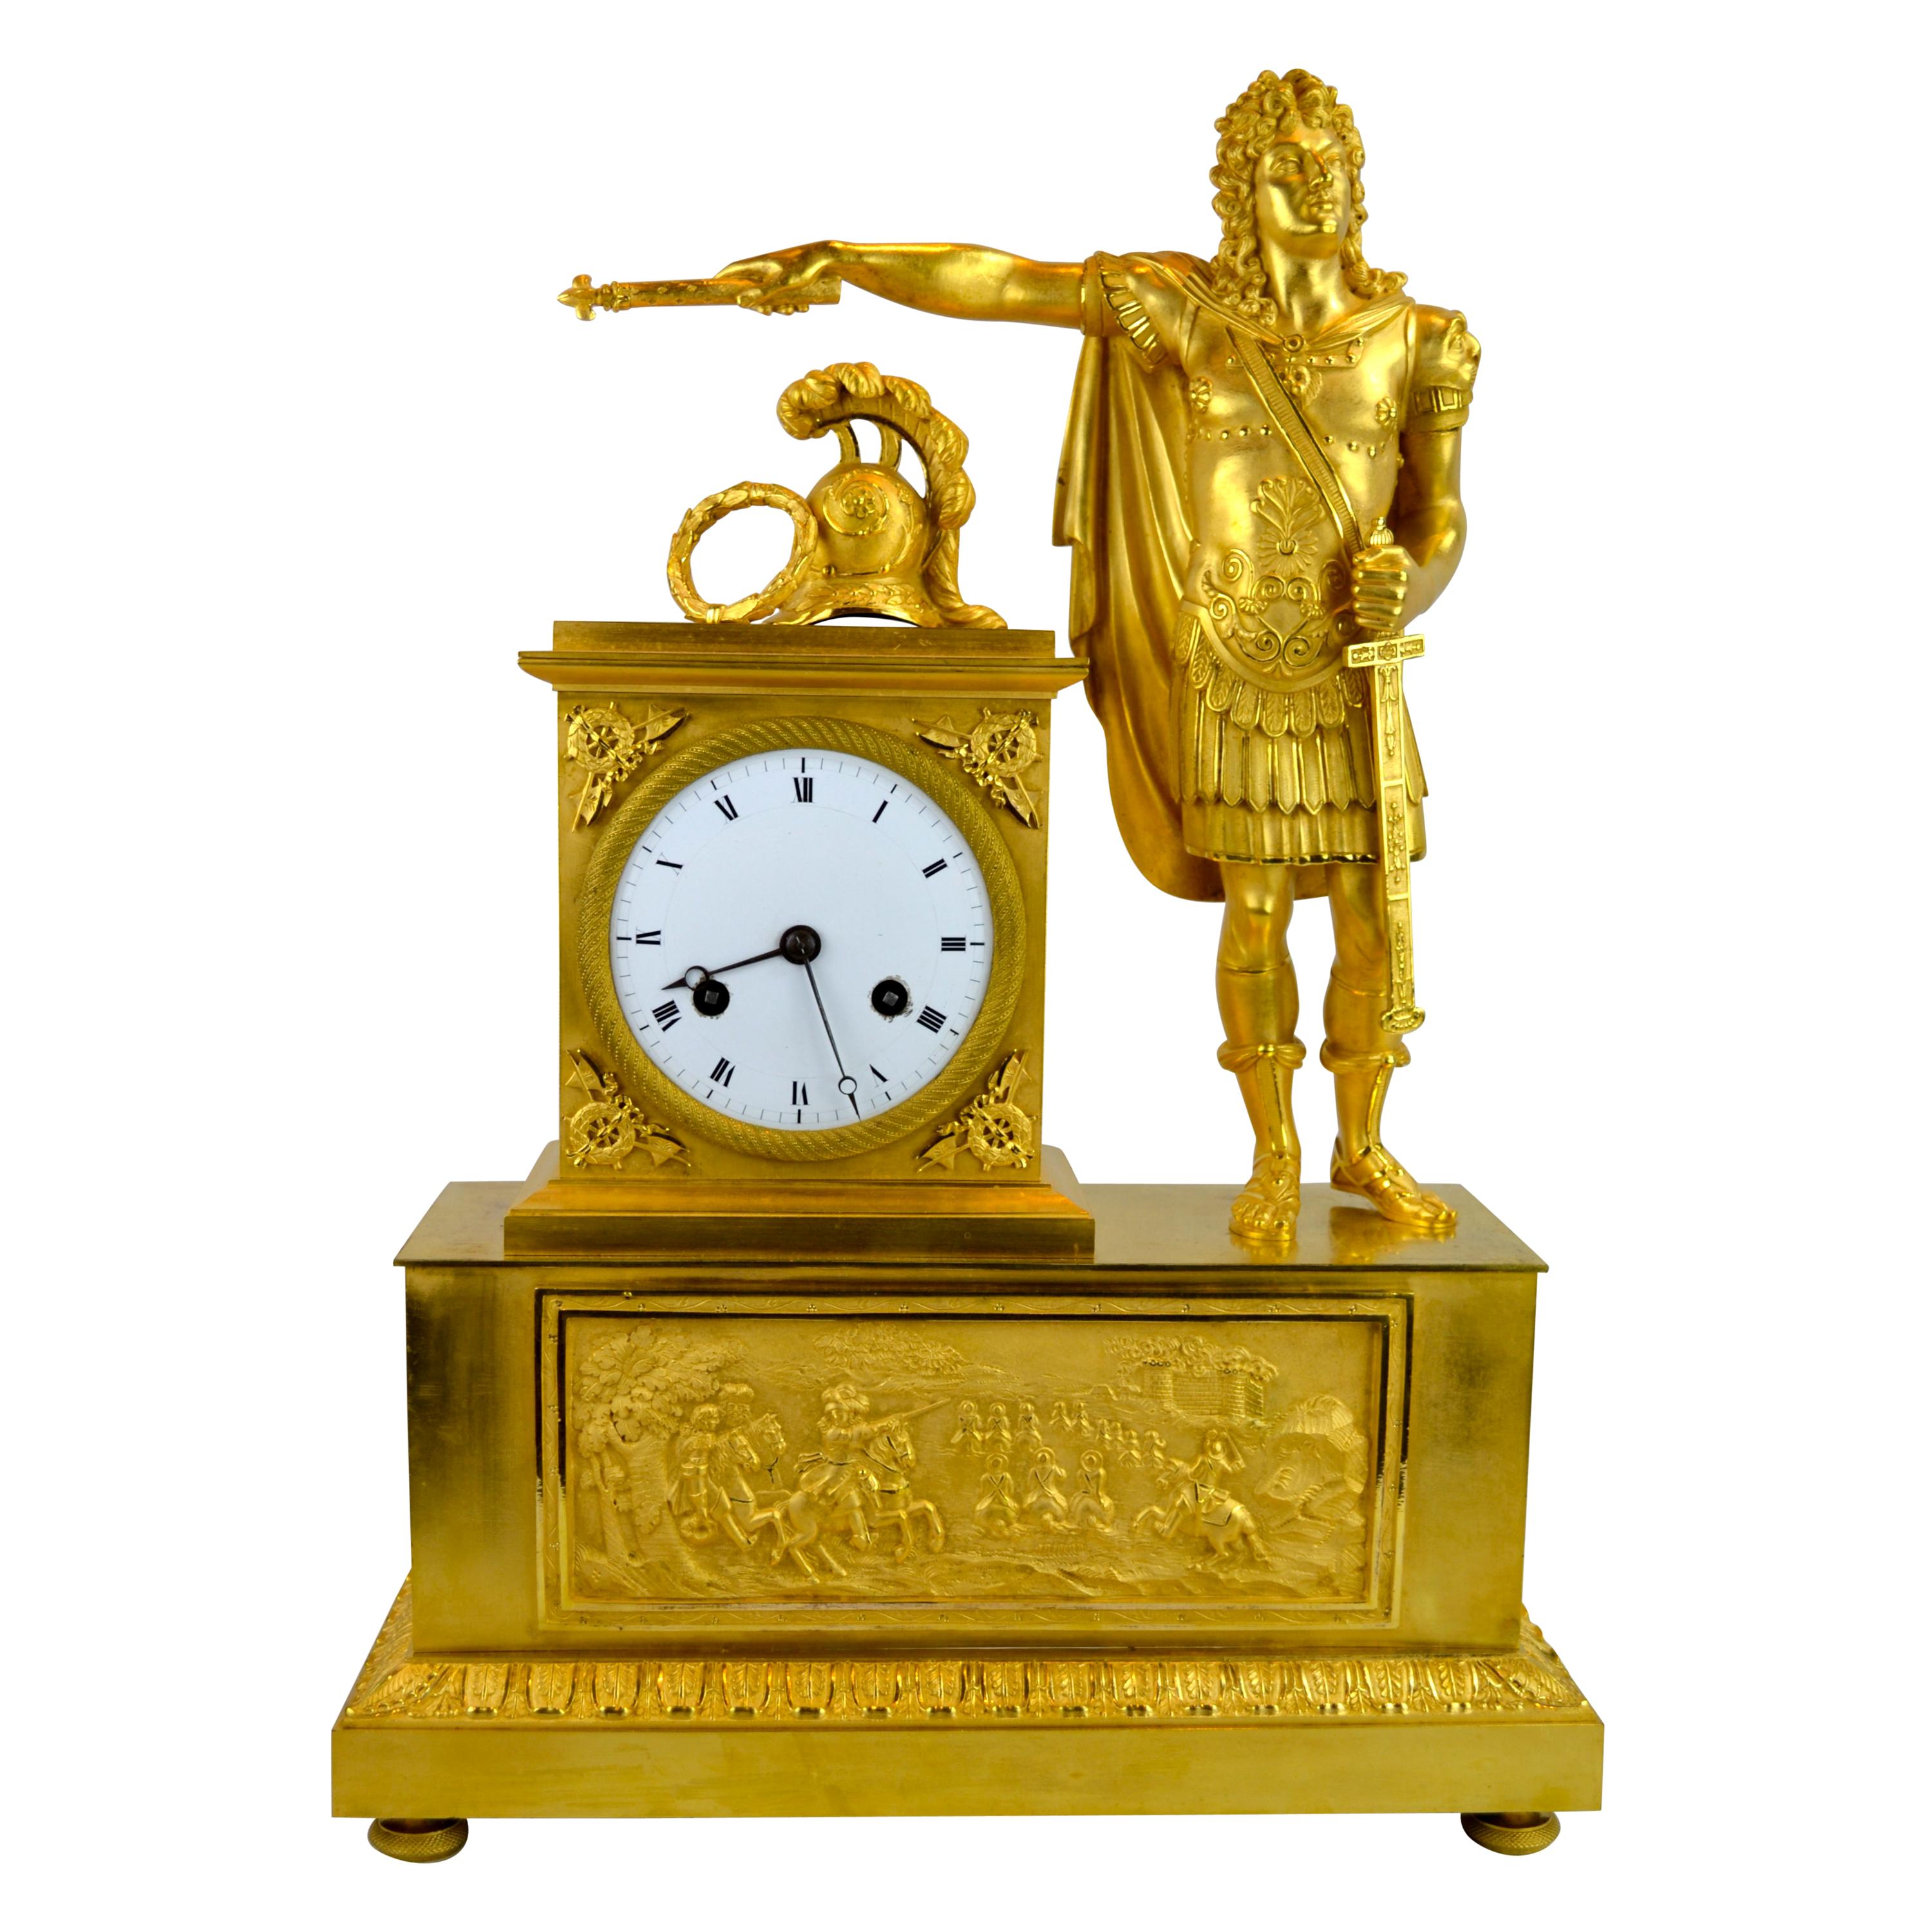 French Empire clock showing Louis XVI dressed as Caesar For Sale